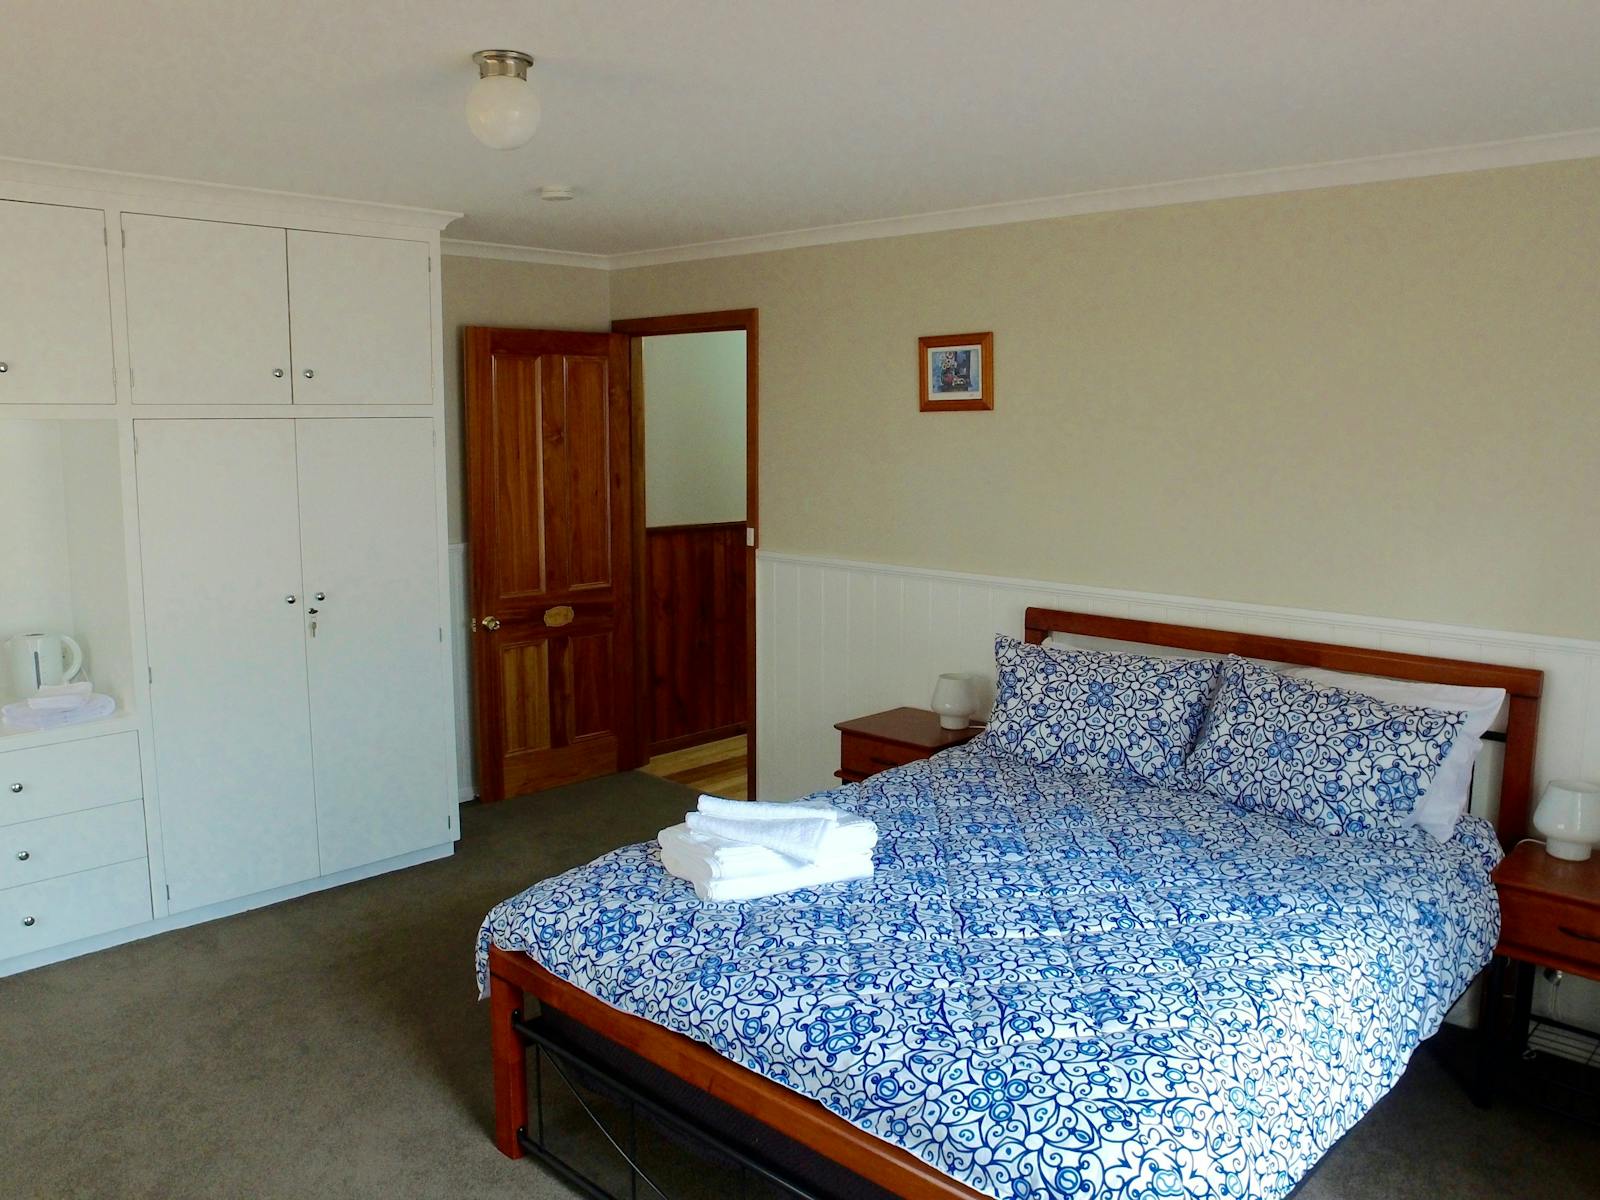 Queen bed with private bathroom, TV and sitting area, breakfast included in price of room